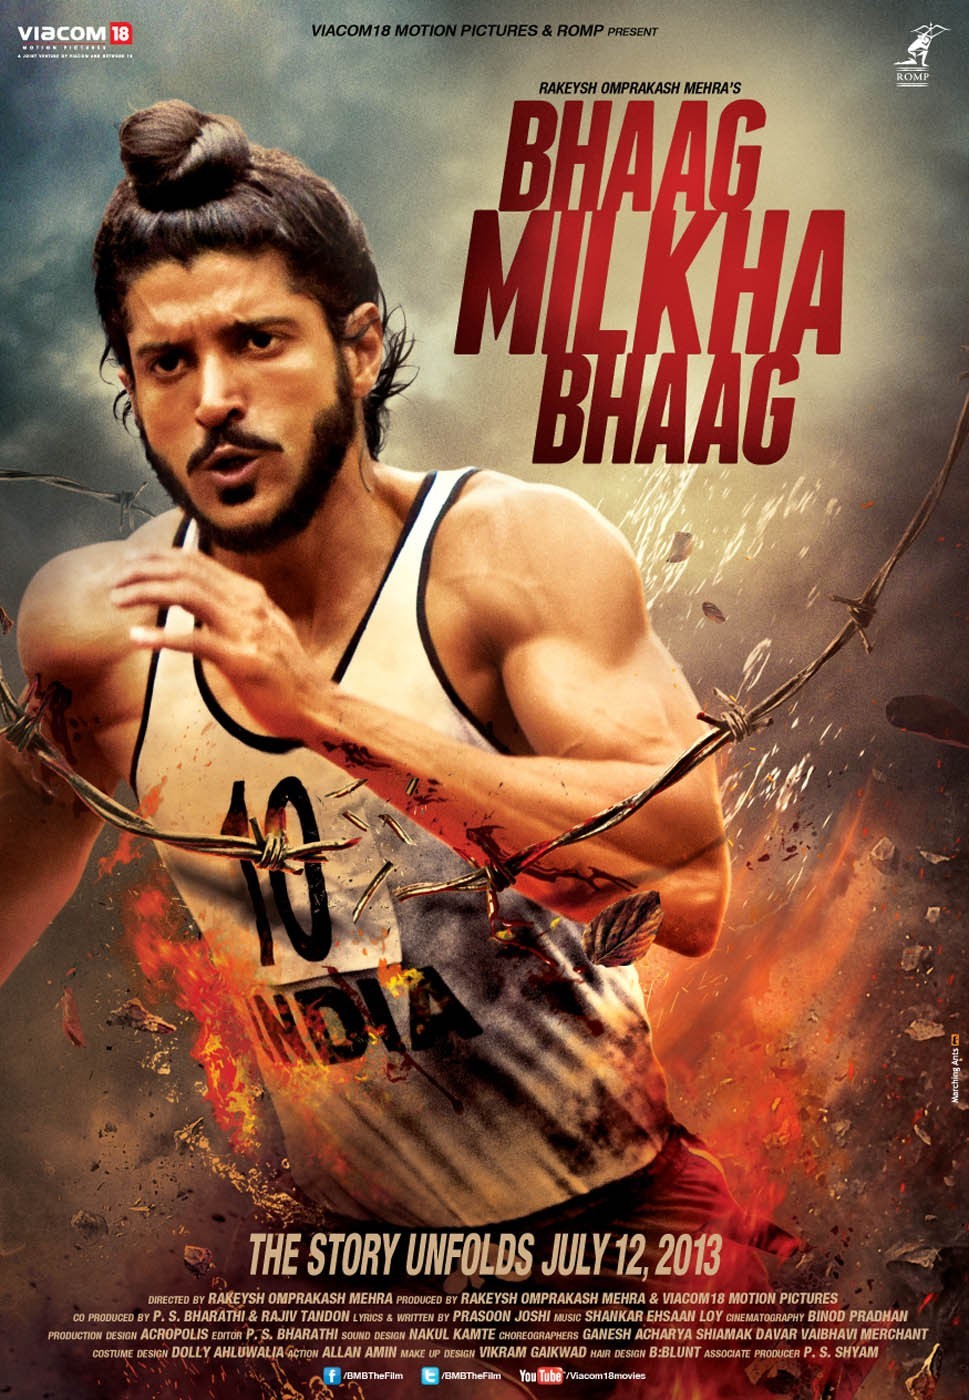 Poster of Viacom 18 Motion Pictures' Bhaag Milkha Bhaag (2013)